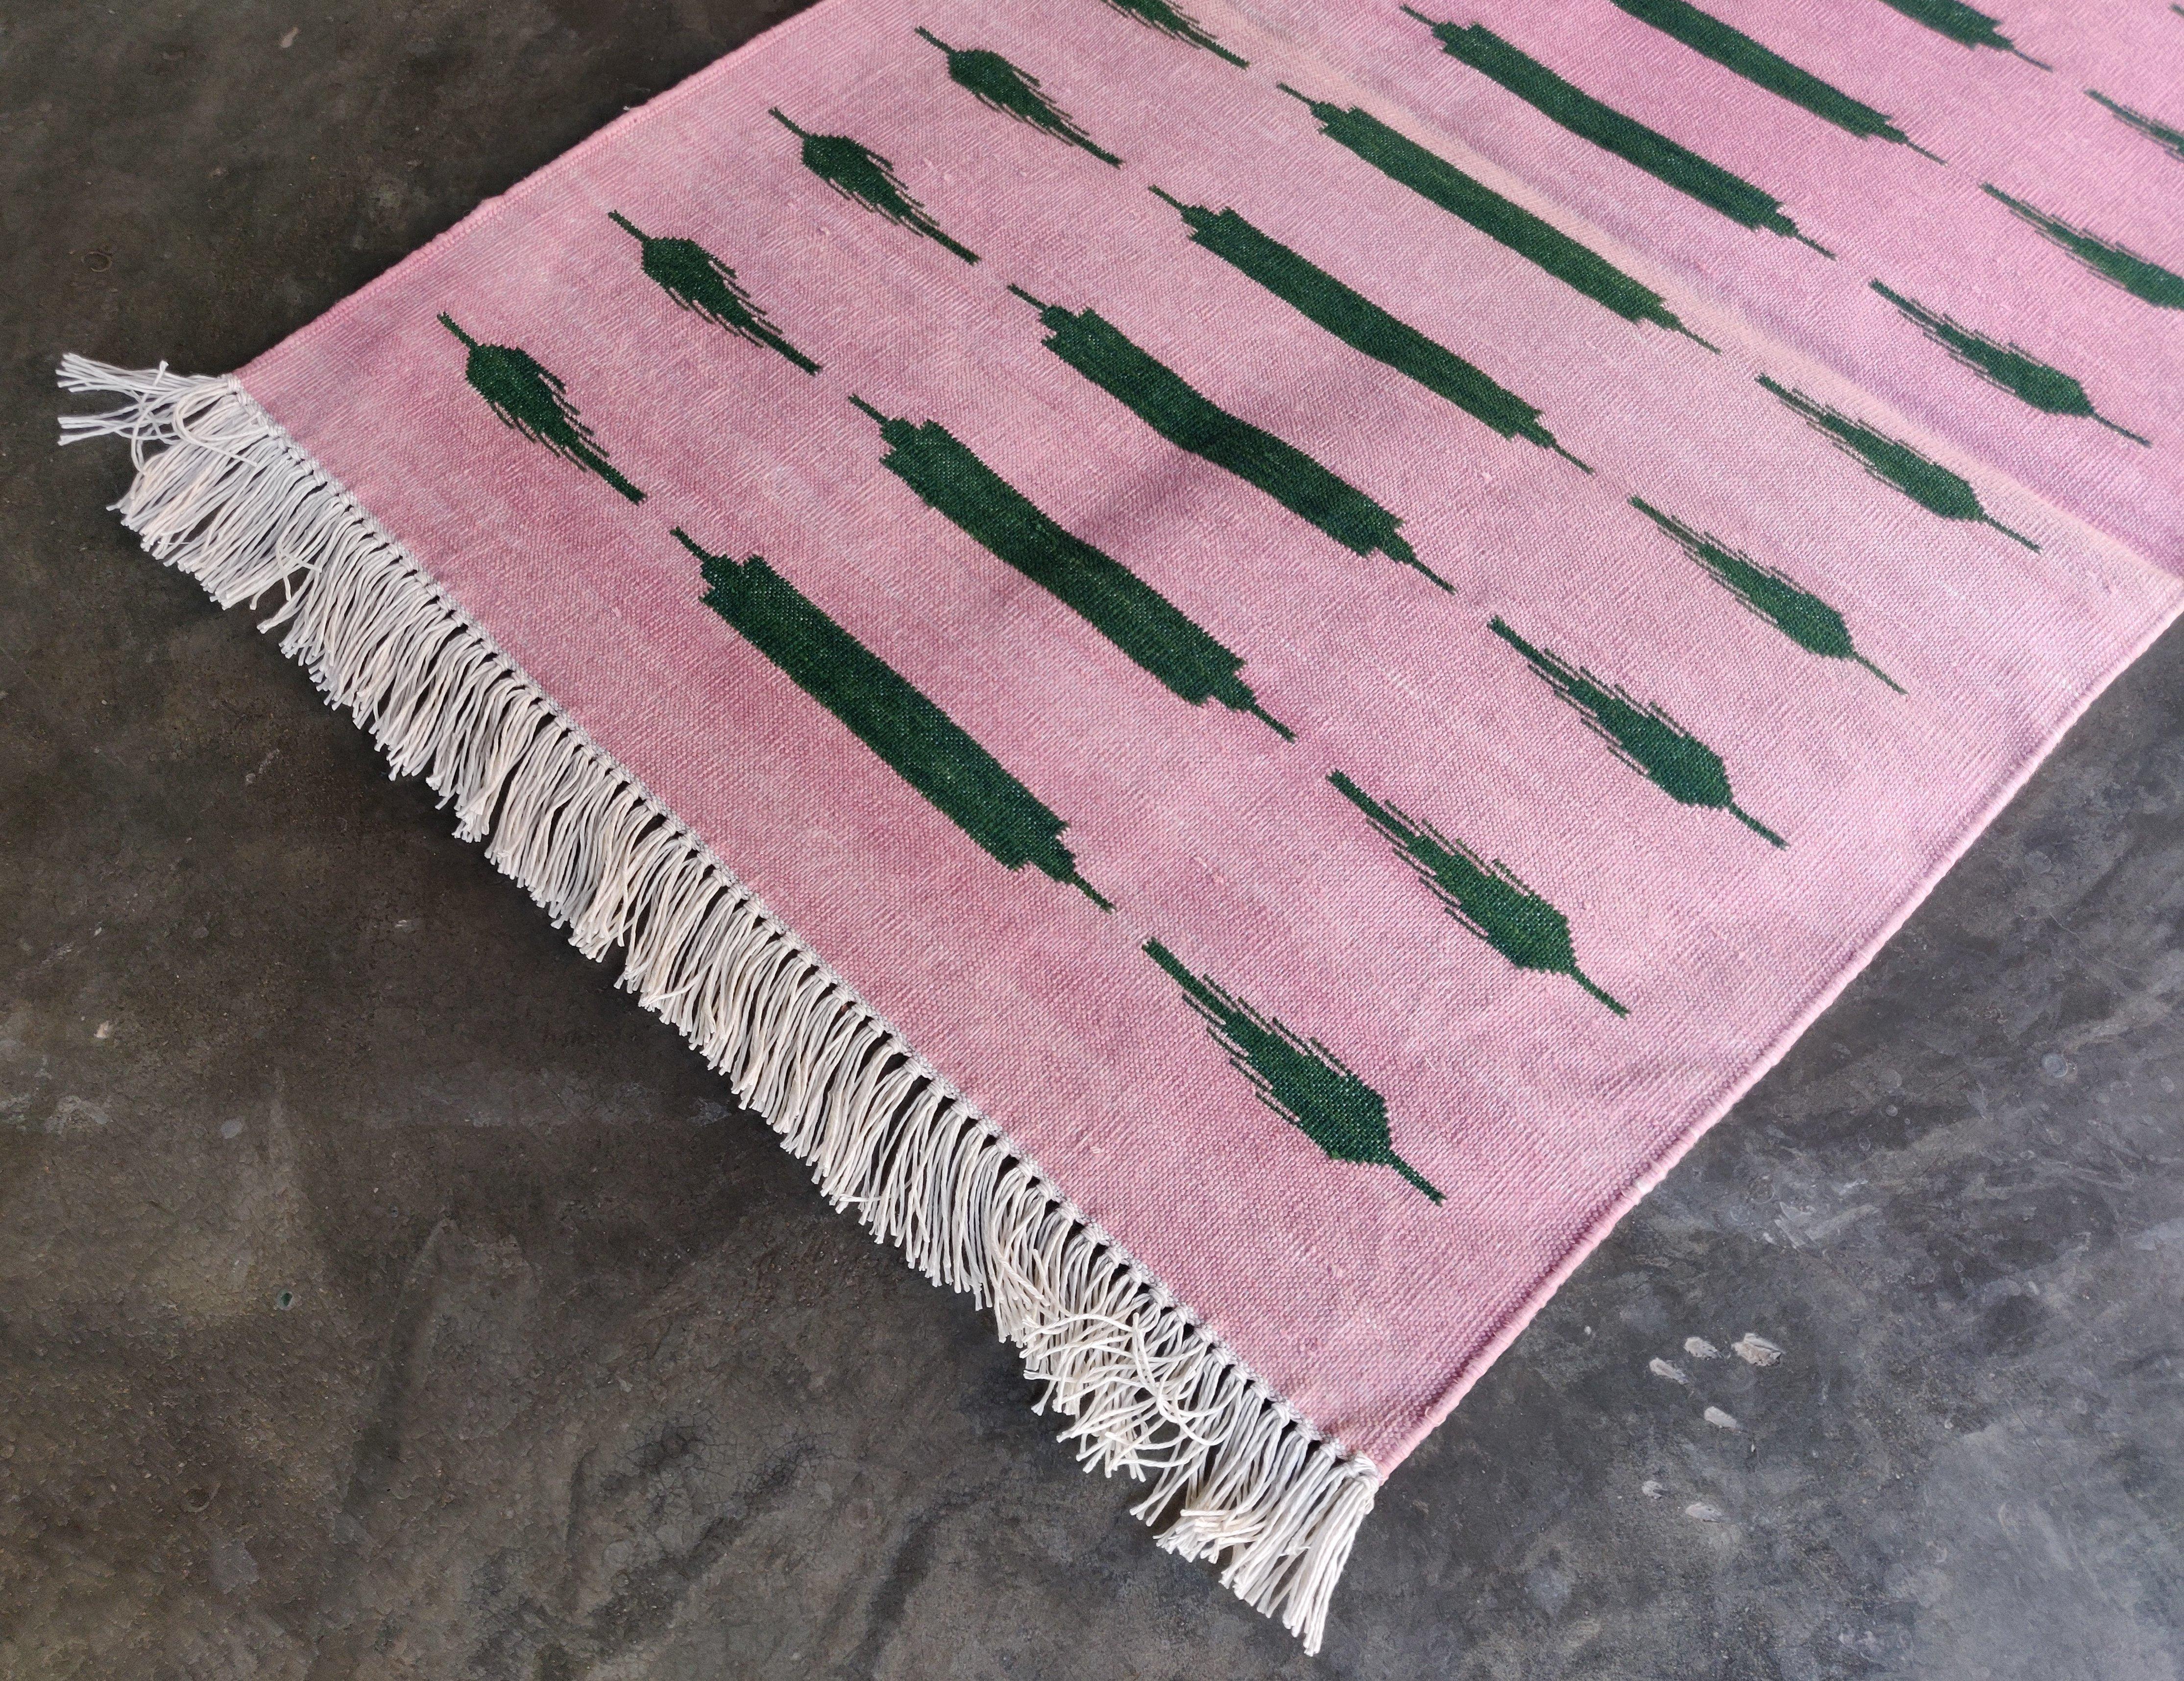 Mid-Century Modern Handmade Cotton Area Flat Weave Rug, 2x3 Pink And Green Striped Indian Dhurrie For Sale